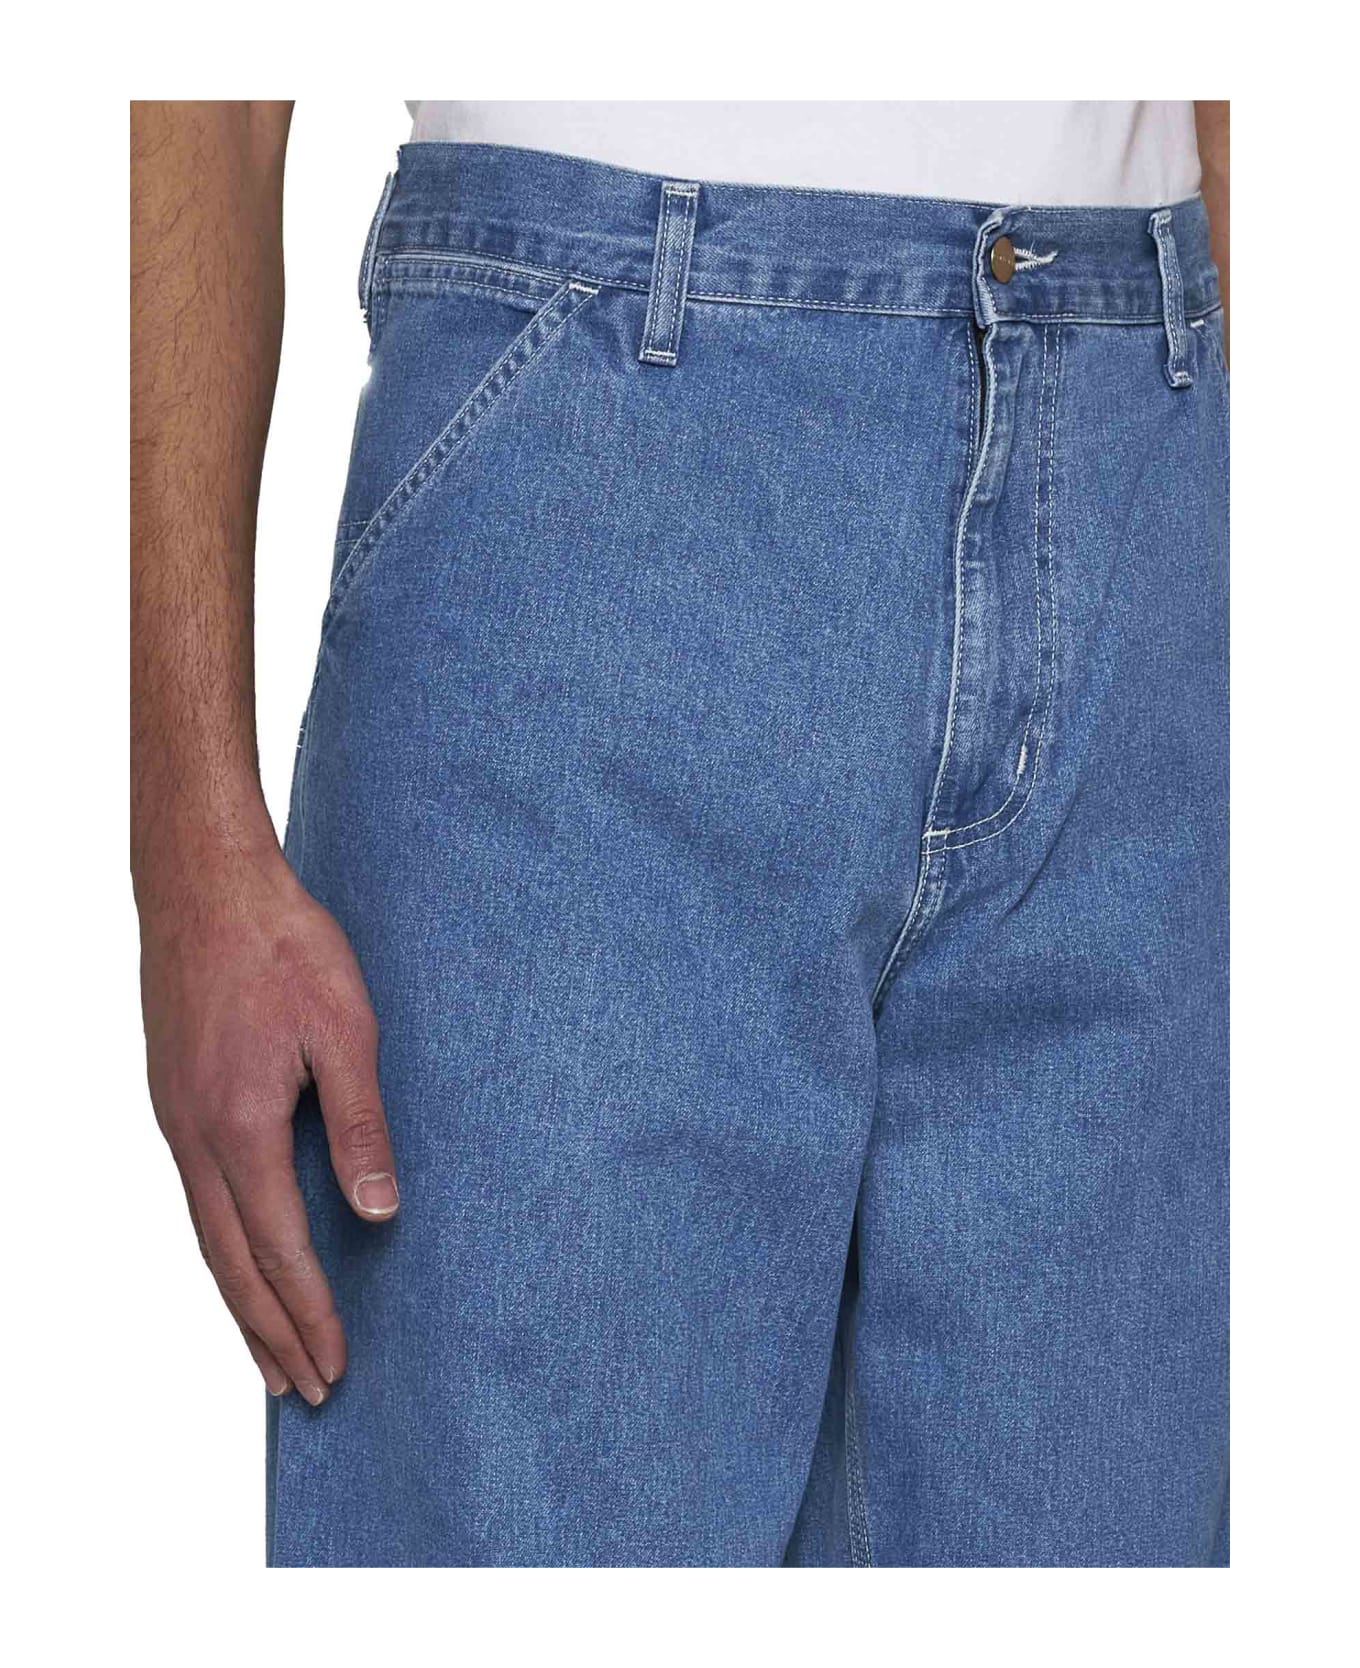 Carhartt Jeans - Blue stone washed